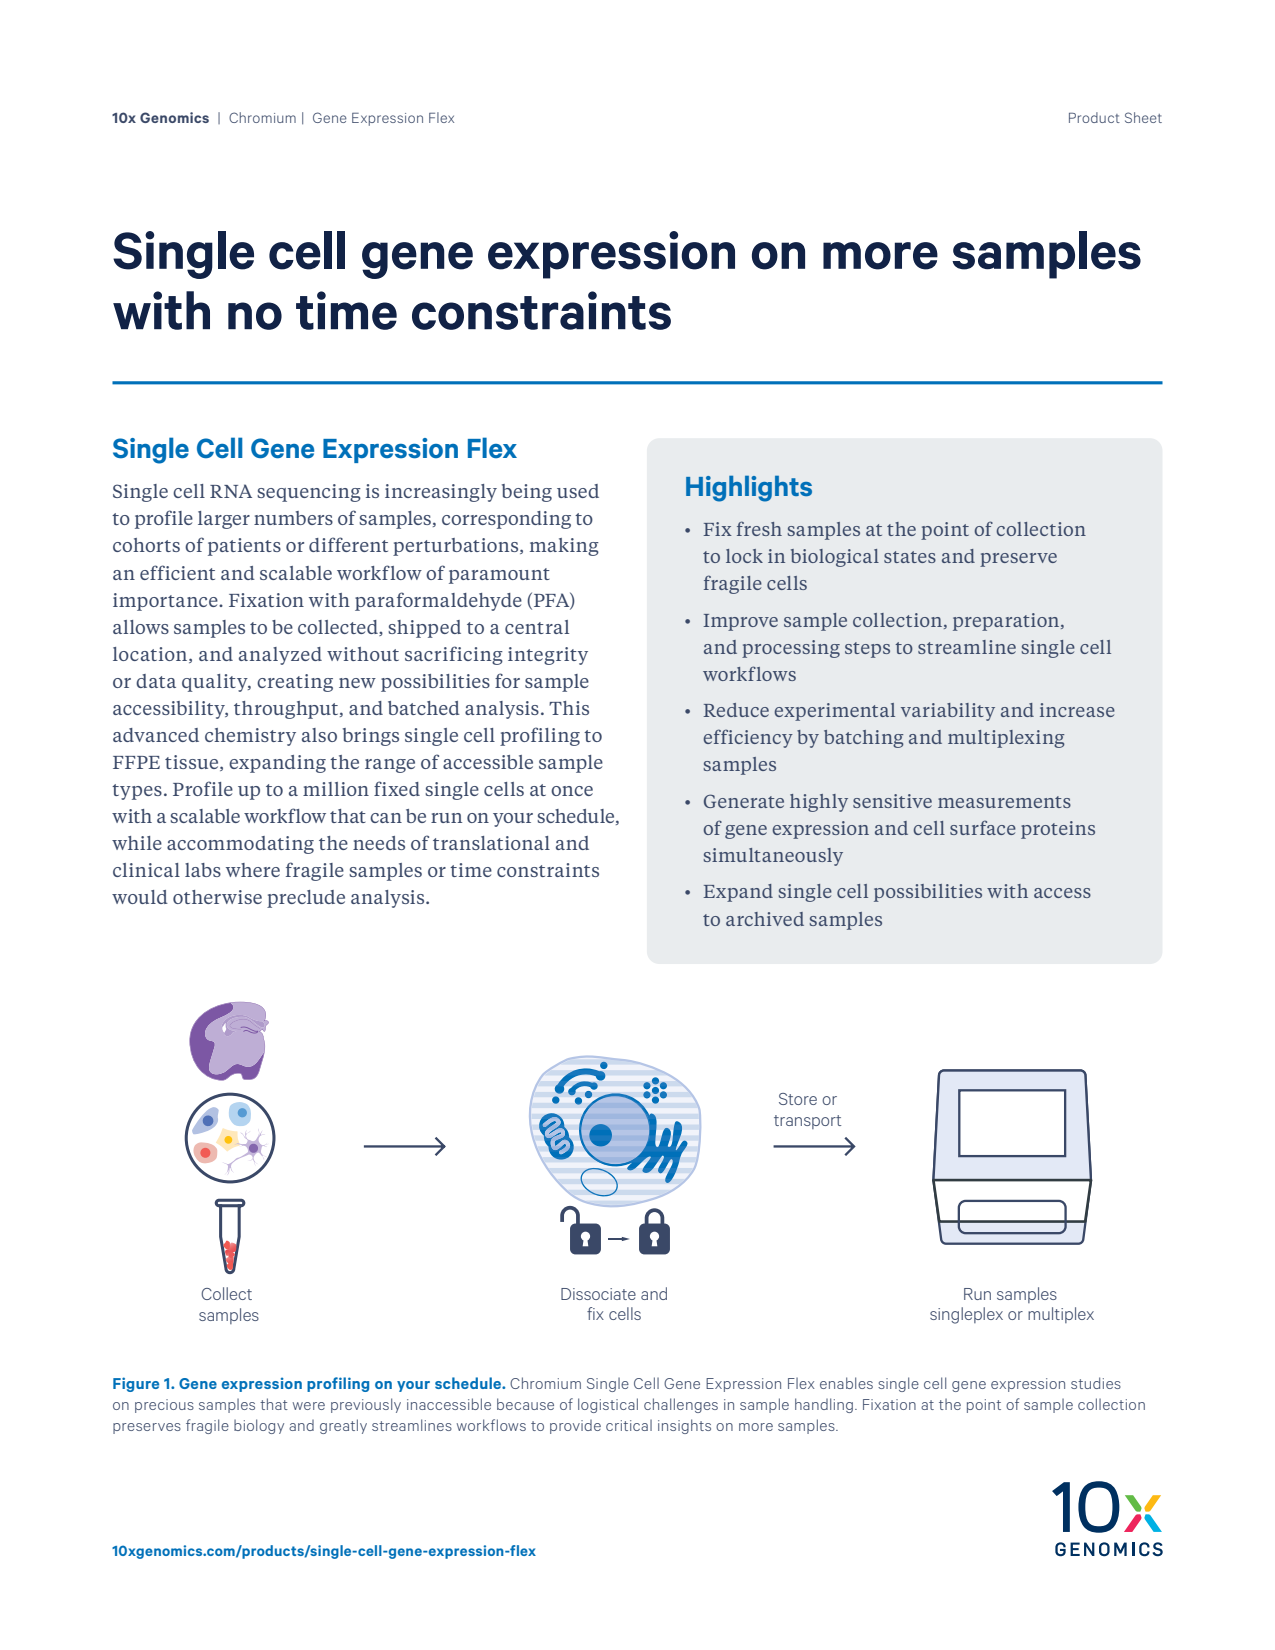 Single Cell Gene Expression Flex Product Sheet: Single cell gene expression on more samples with no time constraints